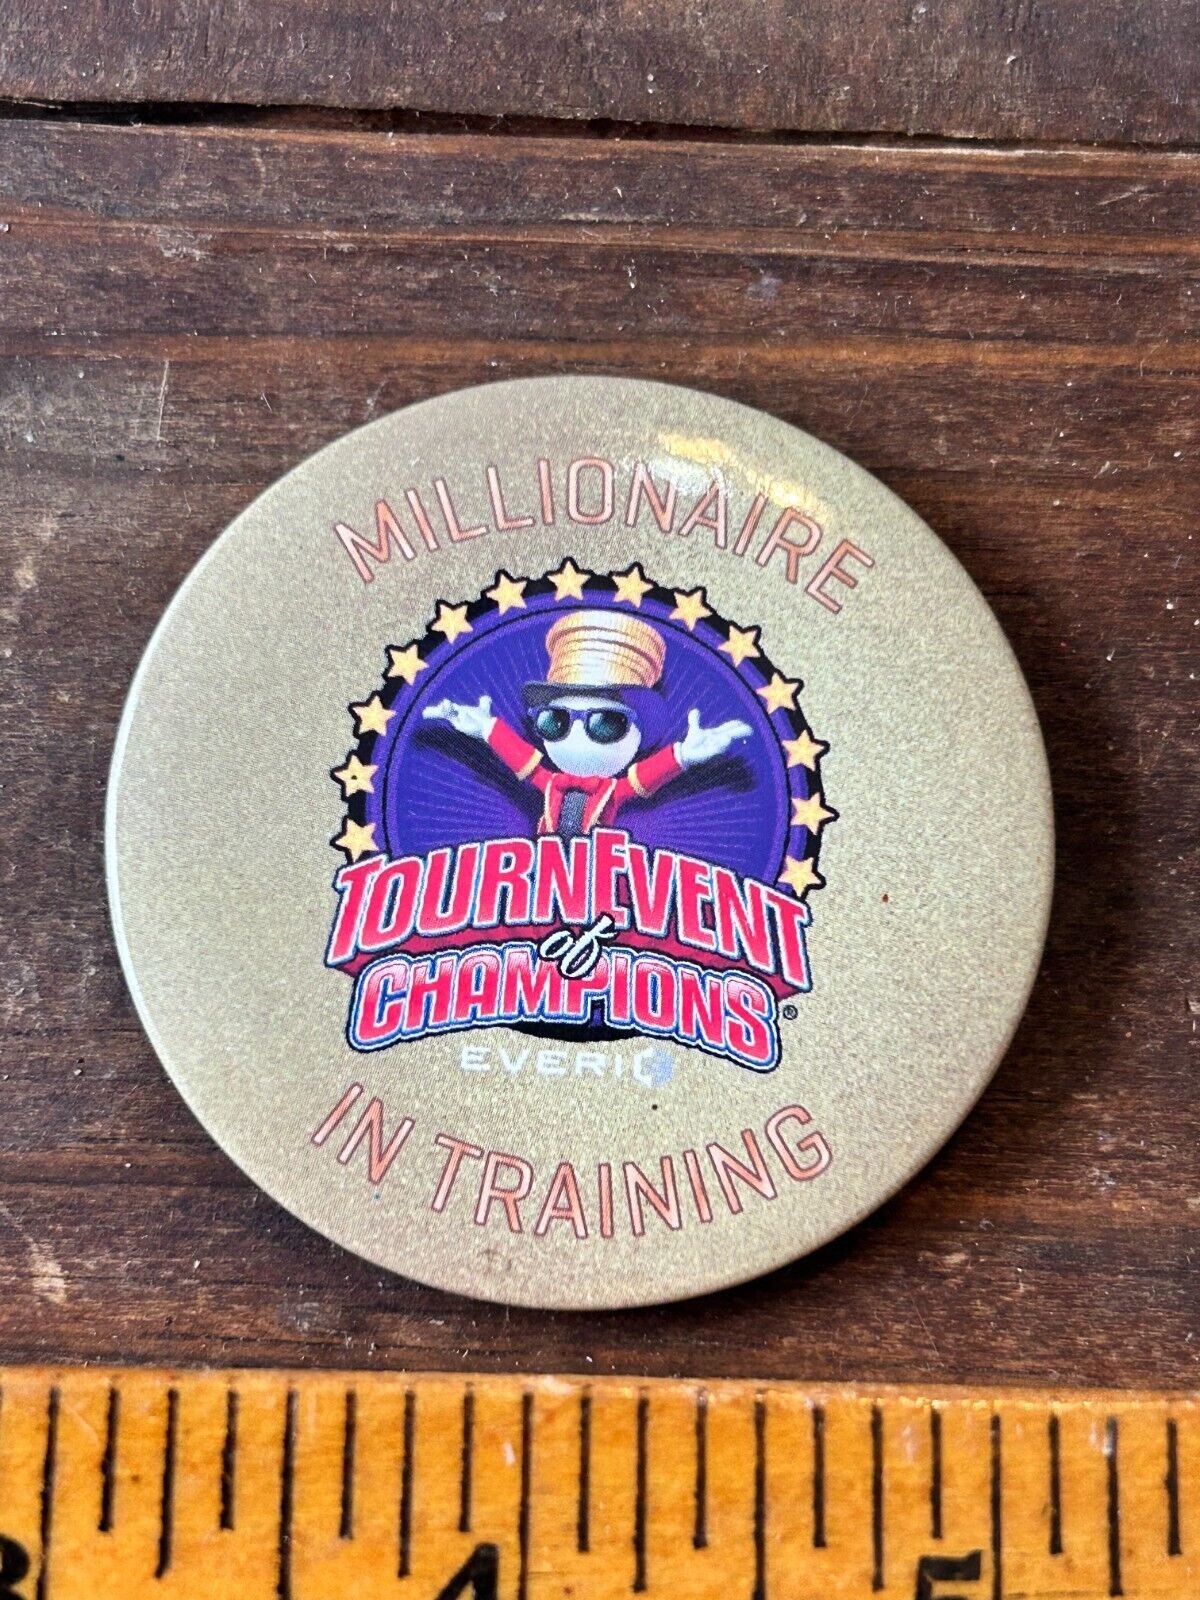 Millionaire in Training TournEvent of Champions Pin (Everic)